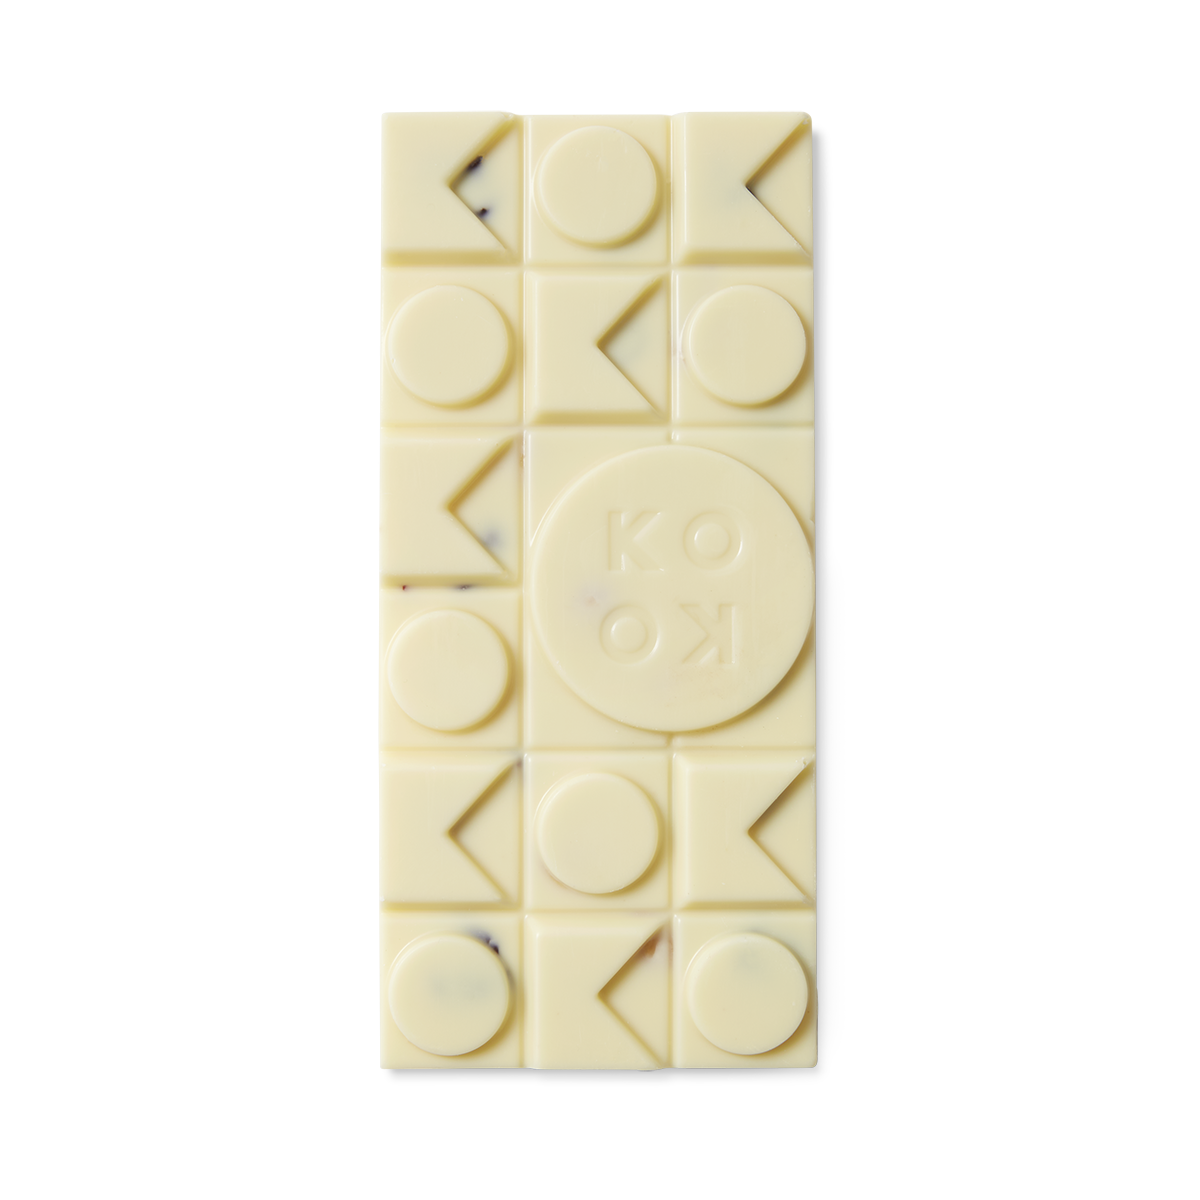 Exposed white chocolate block with art deco pieces